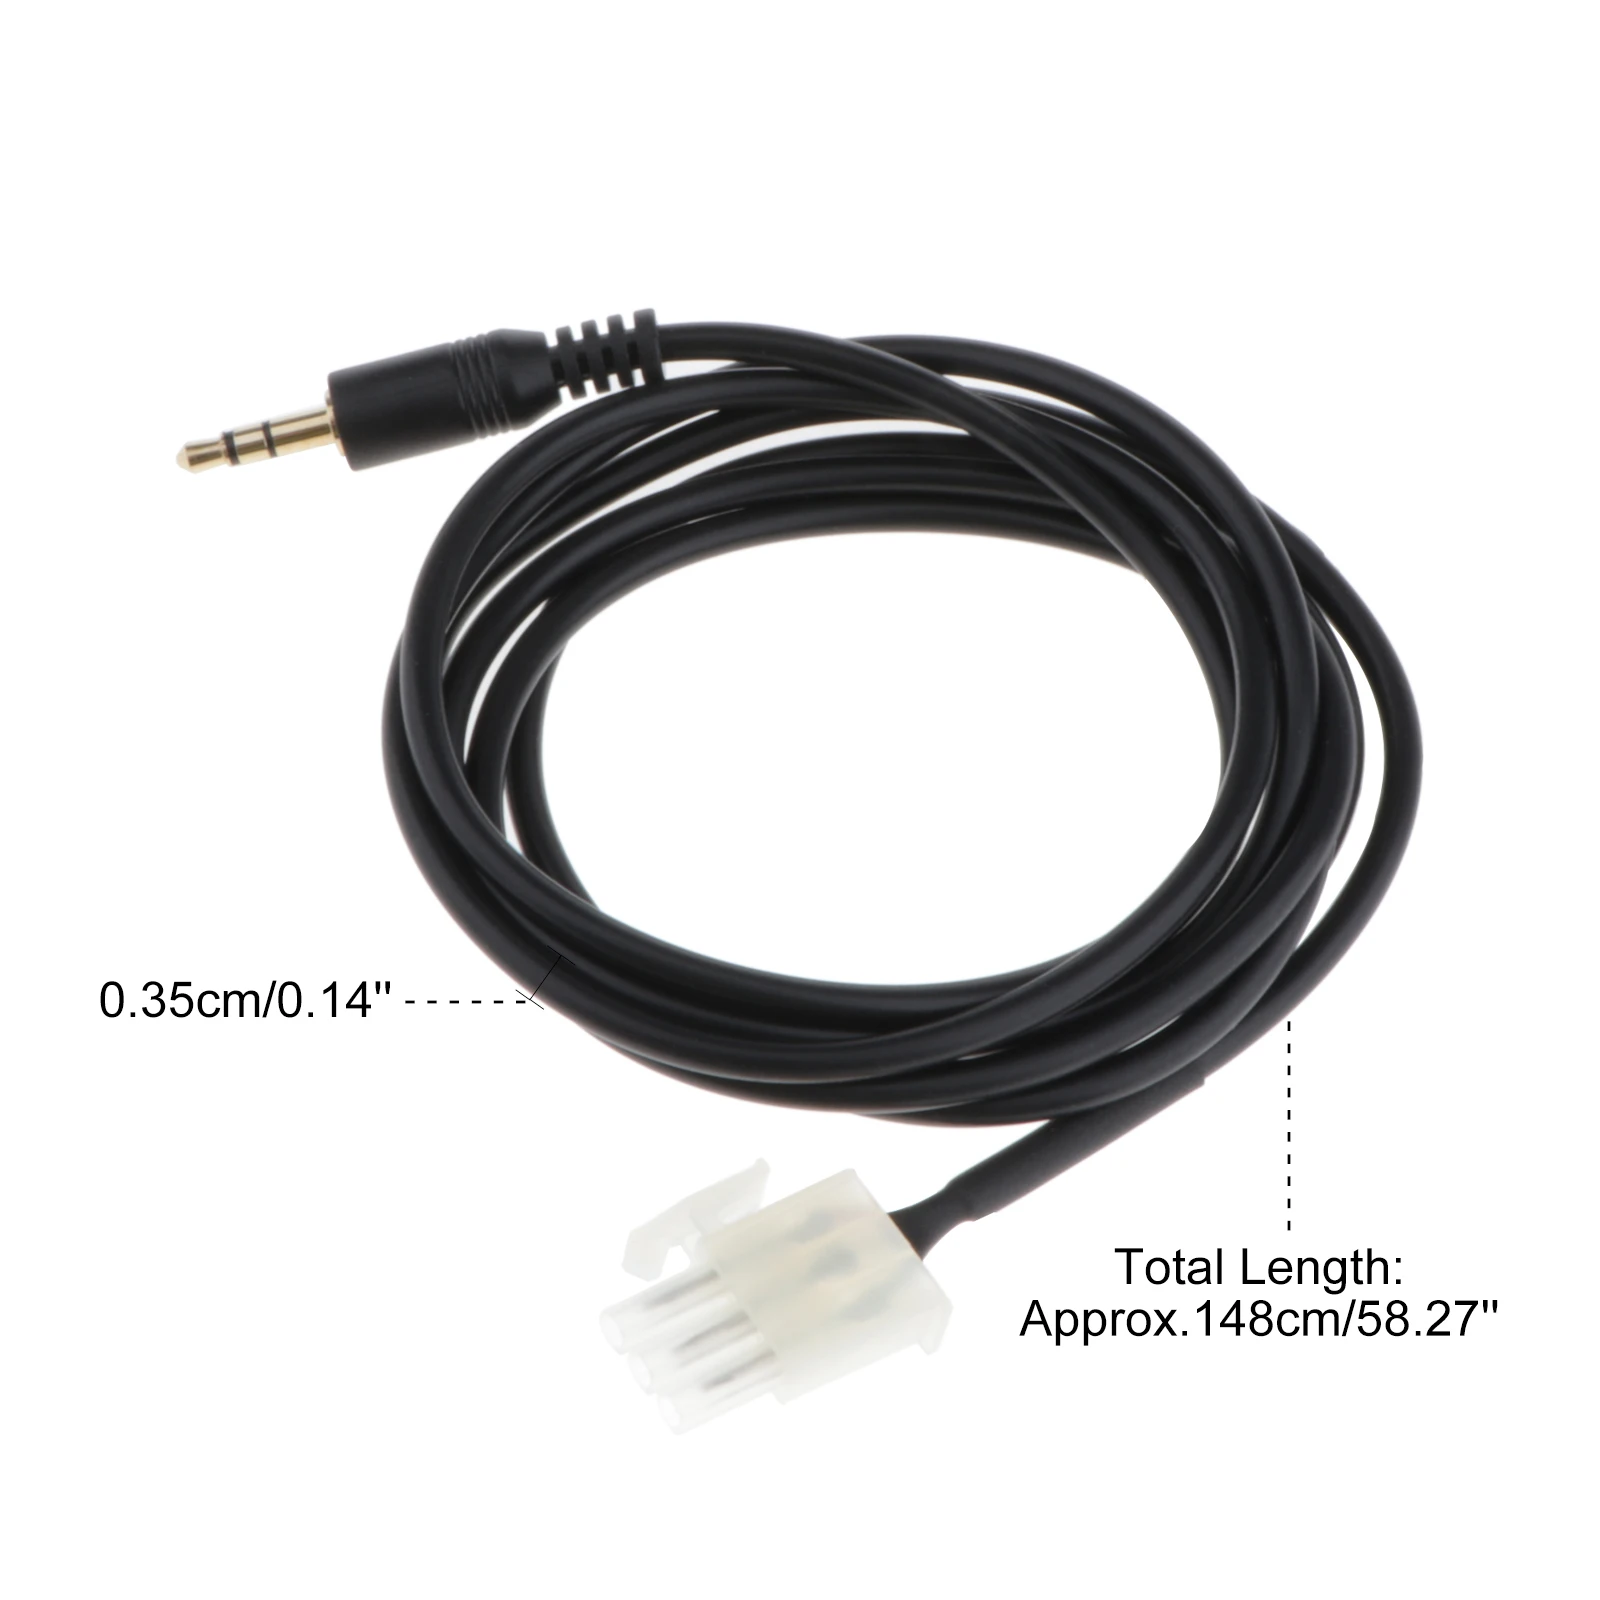 AUX 3.5mm Cable Connect  Smartphone MP3 Phone Audio to Motorcycle Player for